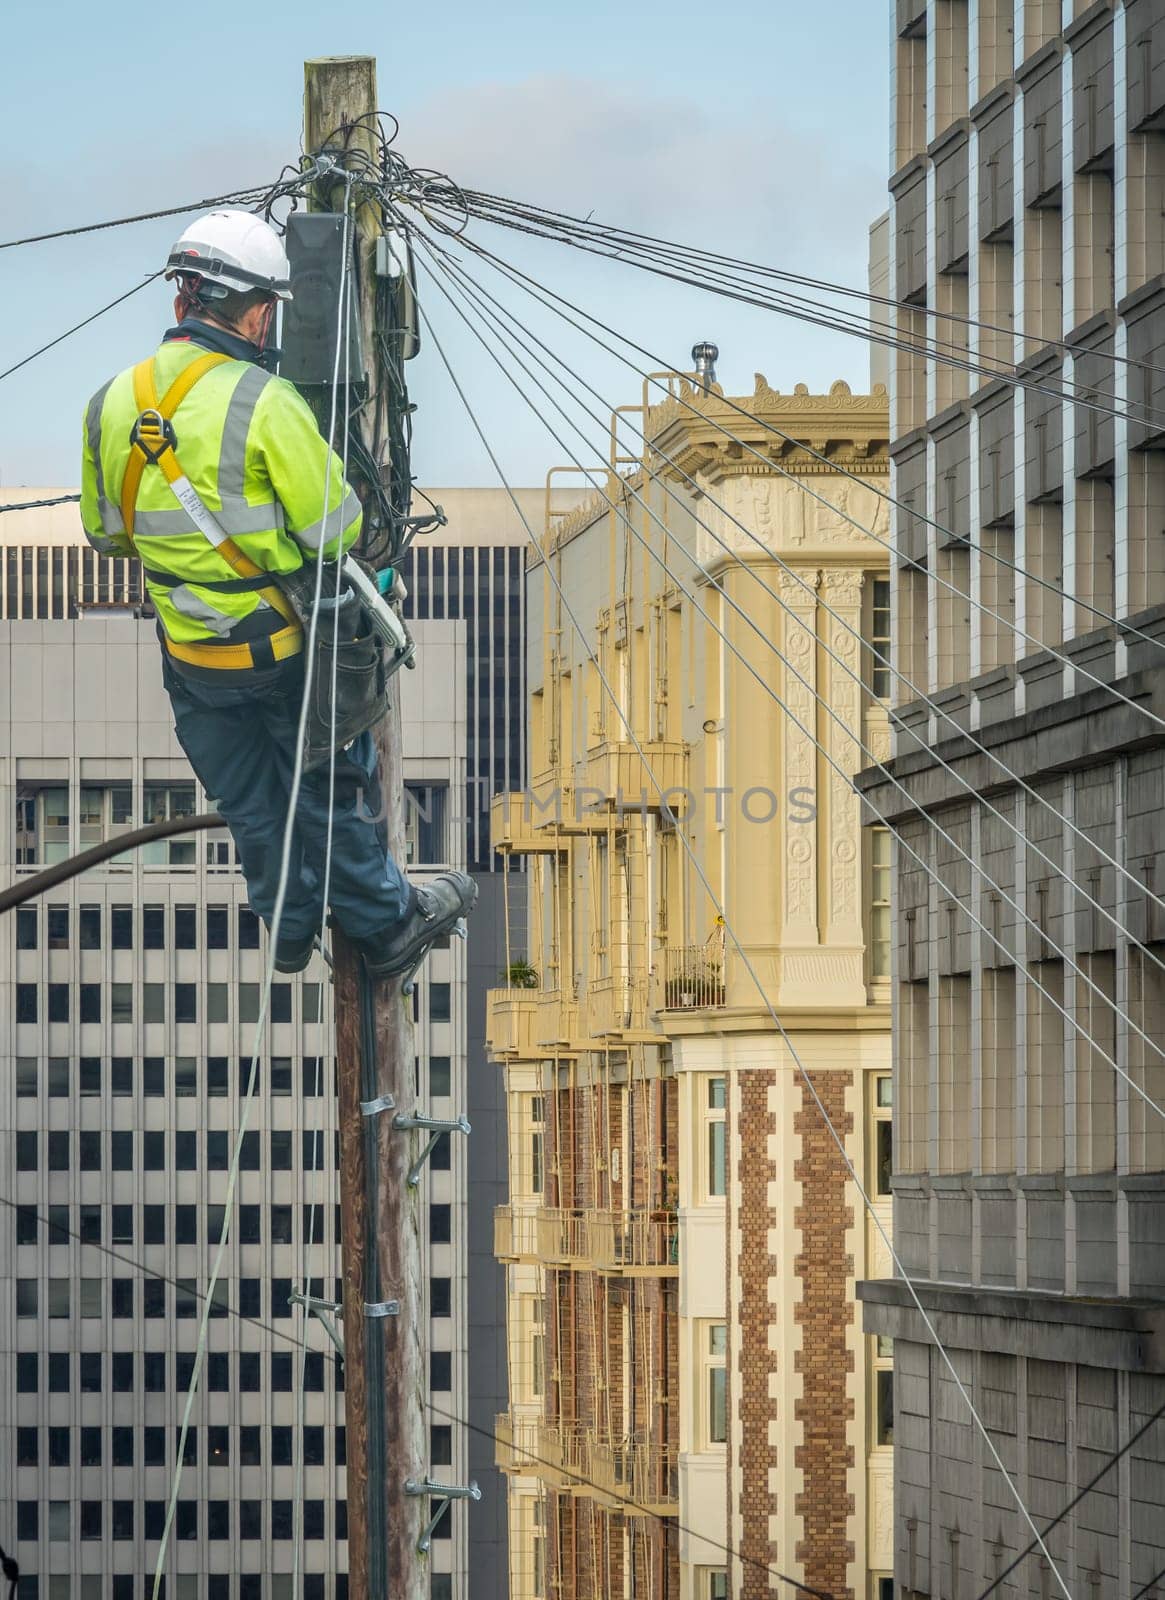 Lineman (Or Lineworker or Engineer) In A City (San Francisco) Fixing A Telephone Line